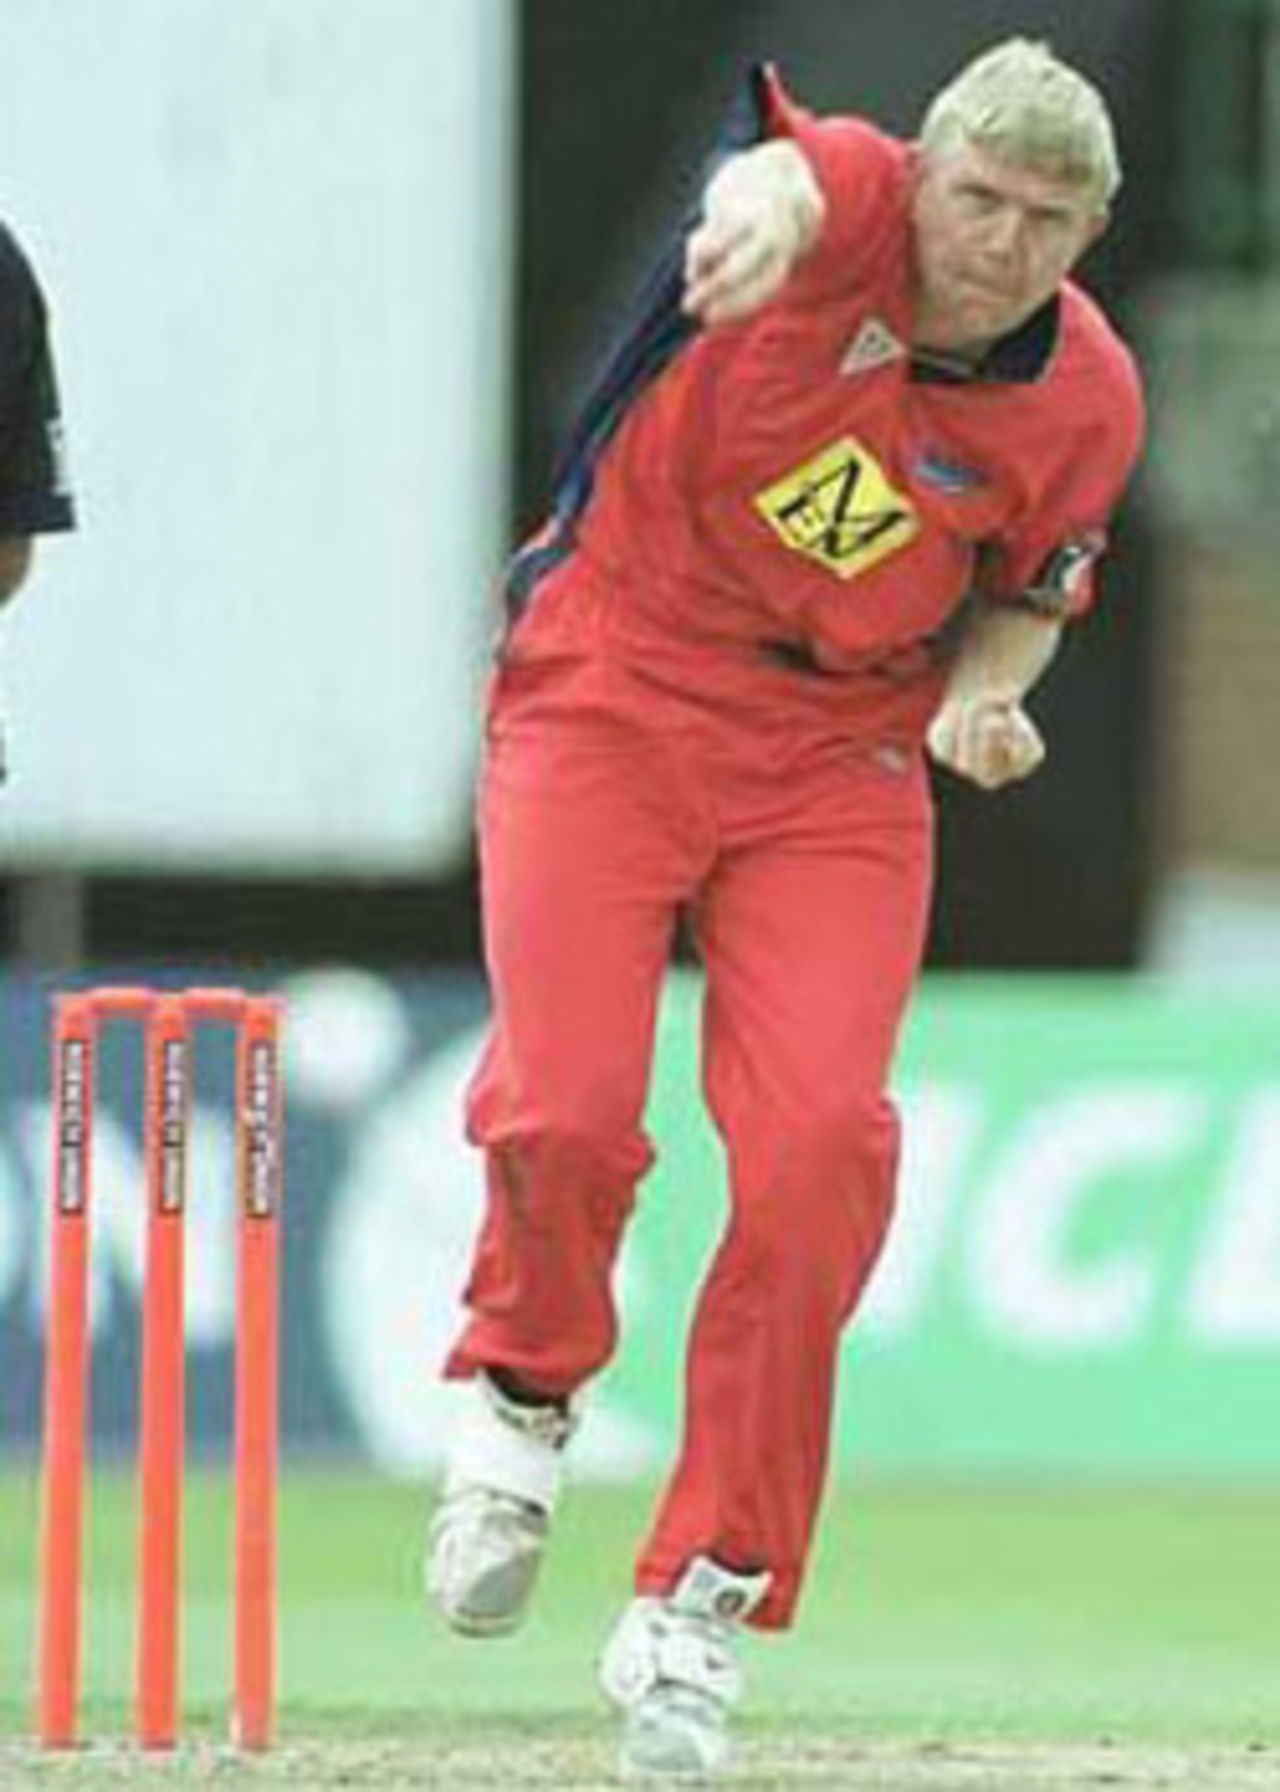 Peter Martin in action against Gloucestershire, National League Division One, 2000, Lancashire v Gloucestershire, Old Trafford, Manchester, 11 August 2000.